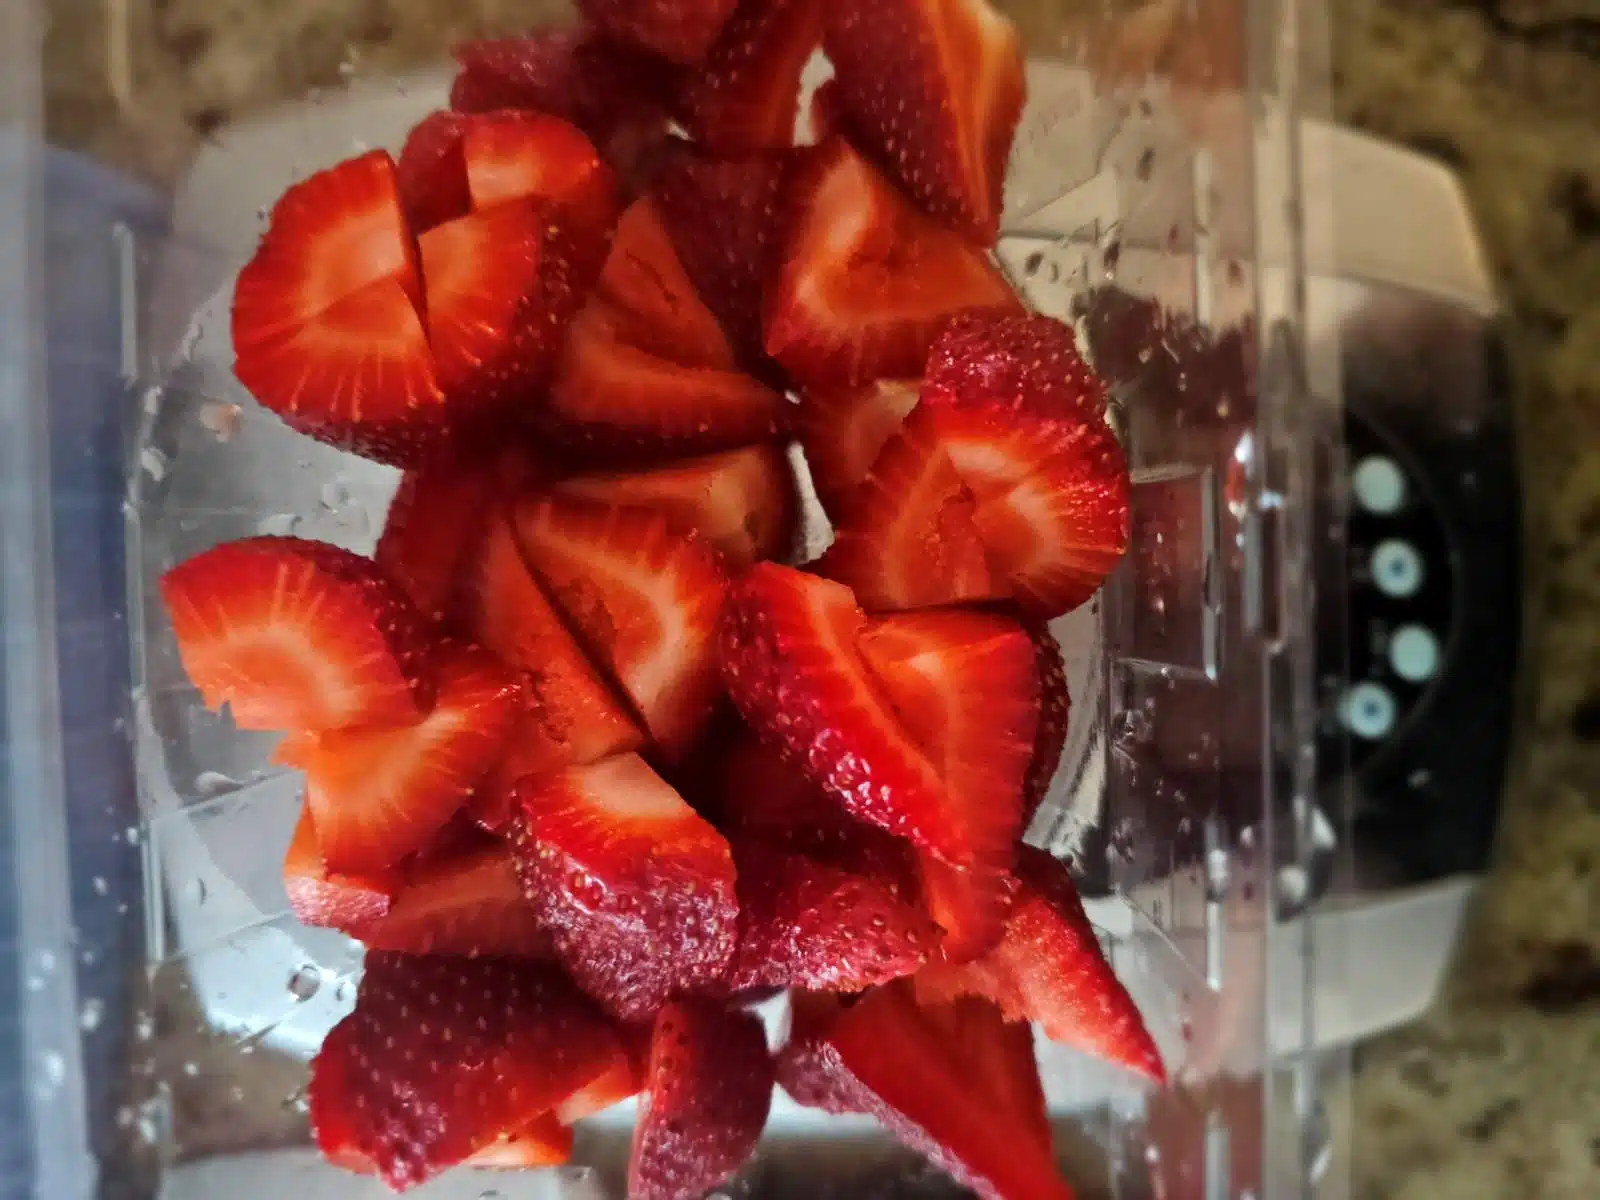 cut strawberries being weighed on a kitchen scale